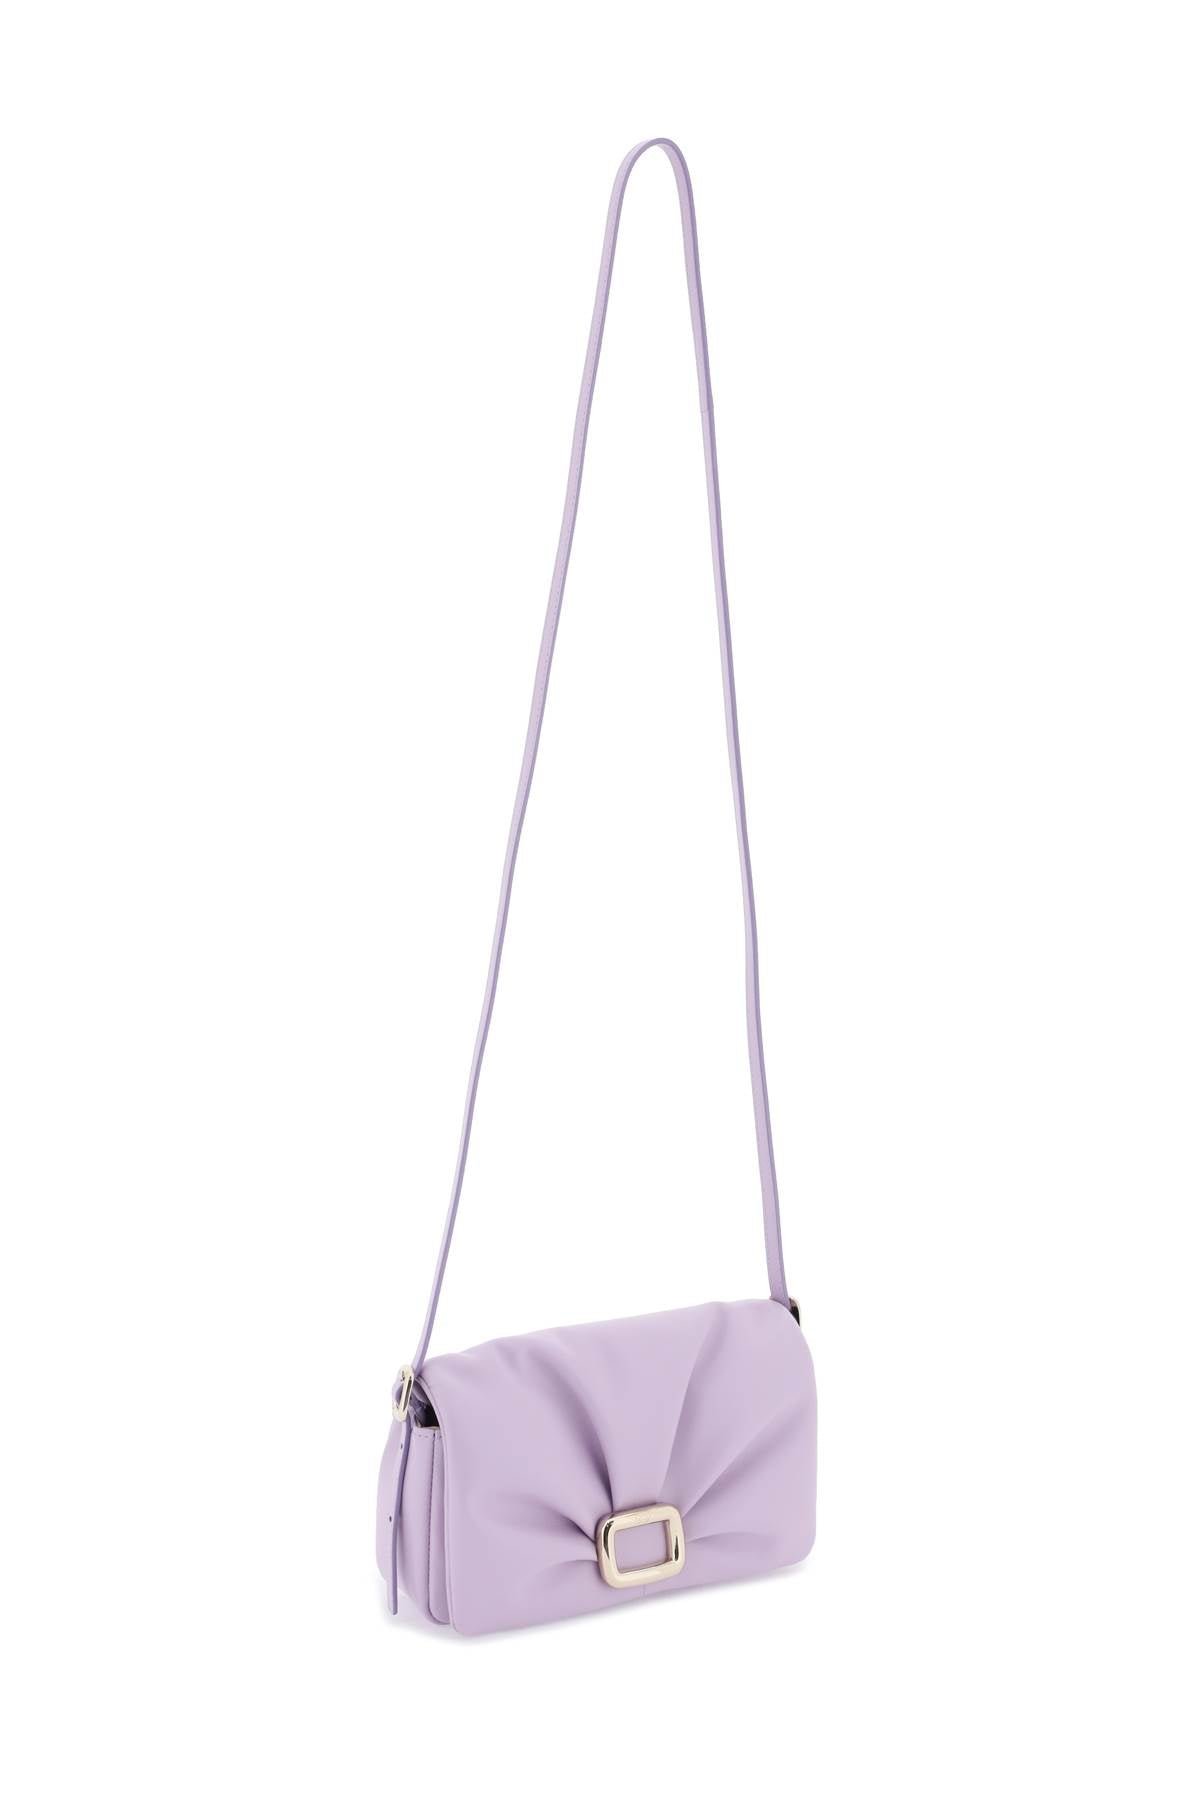 ROGER VIVIER Mini Leather Crossbody Bag with Iconic Buckle, Magnetic Closure & Adjustable Strap - Purple